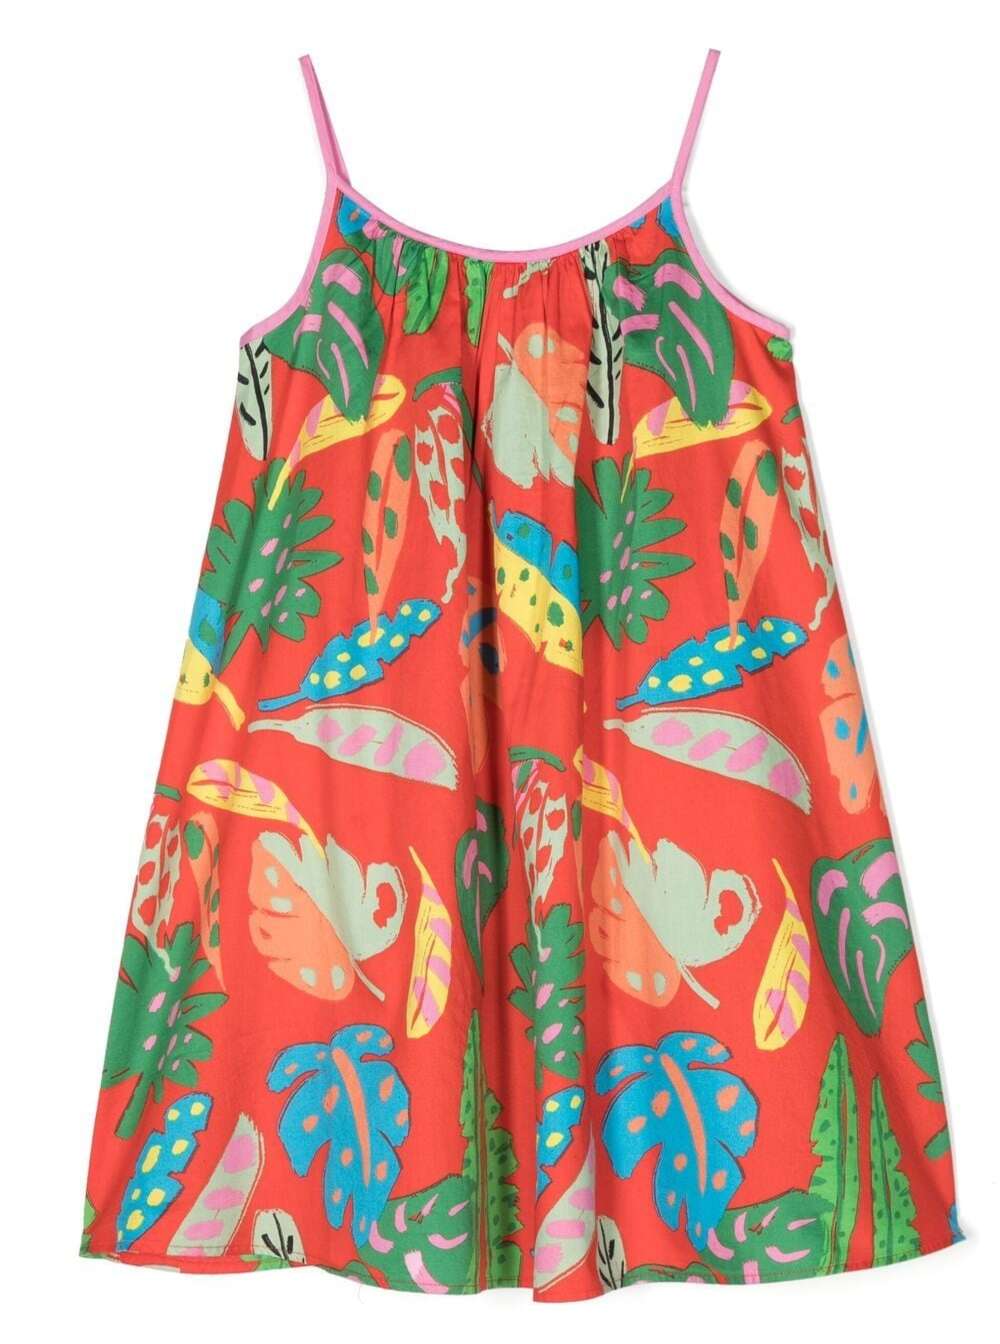 STELLA MCCARTNEY MULTICOLOR ALL-OVER PALM TREE GRAPHIC PRINT DRESS IN COTTON GIRL